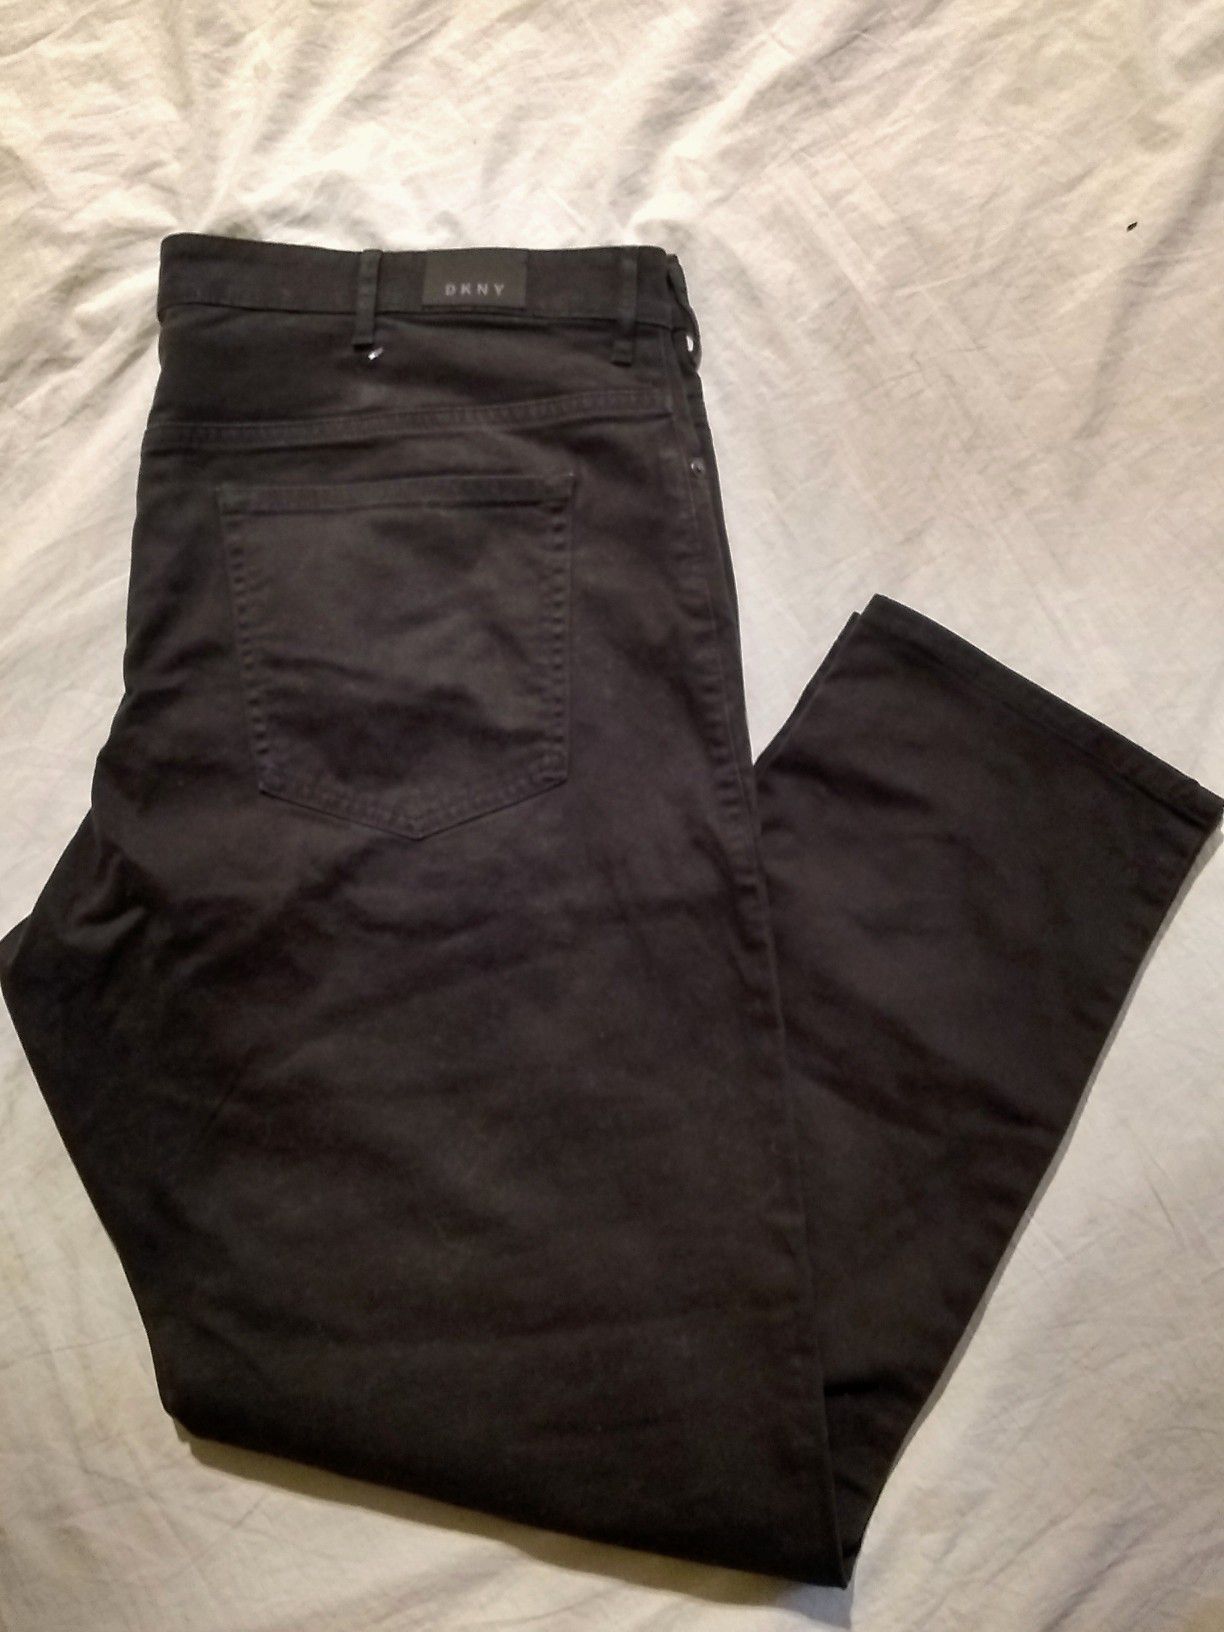 DKNY STRETCHY JEANS FOR MEN SIZE 40X30." PICK UP ONLY"